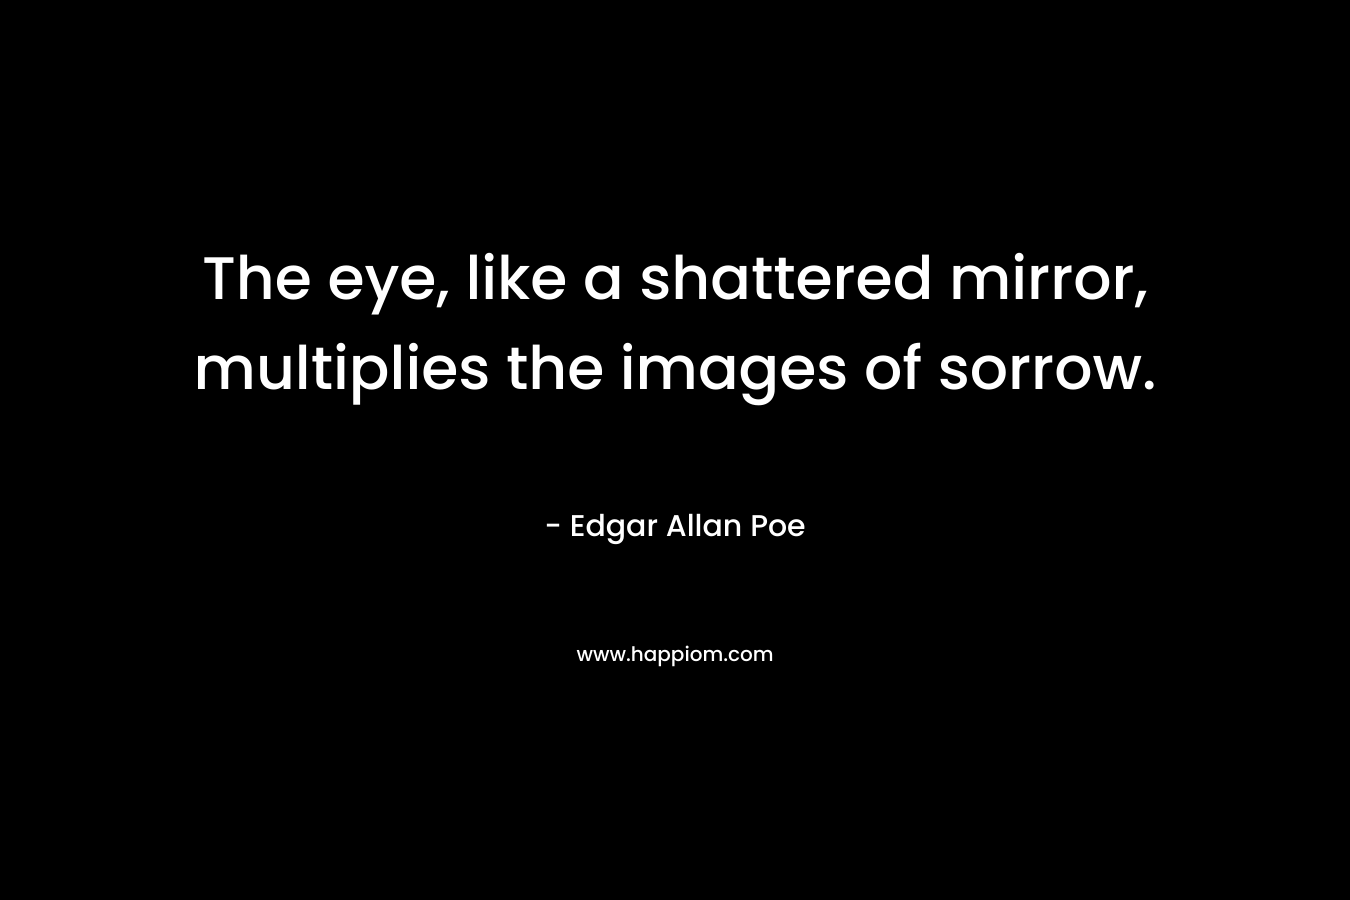 The eye, like a shattered mirror, multiplies the images of sorrow. – Edgar Allan Poe